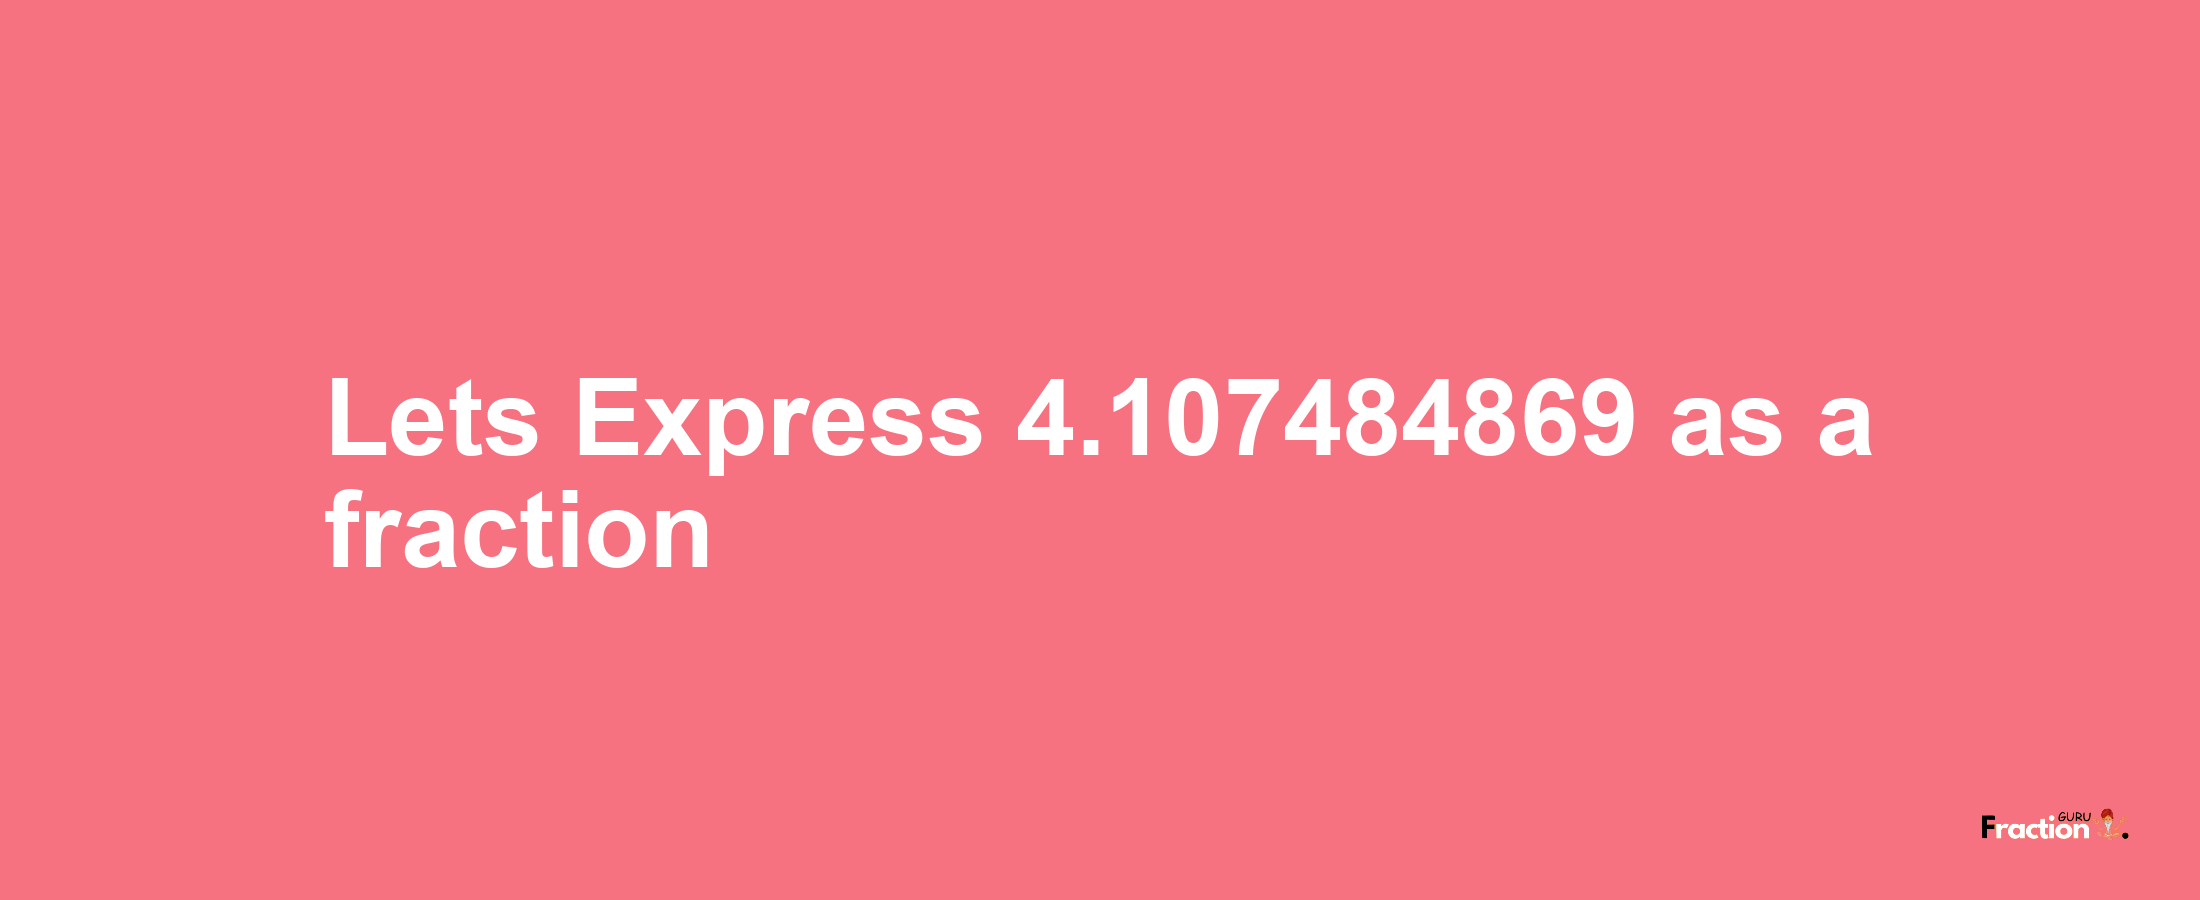 Lets Express 4.107484869 as afraction